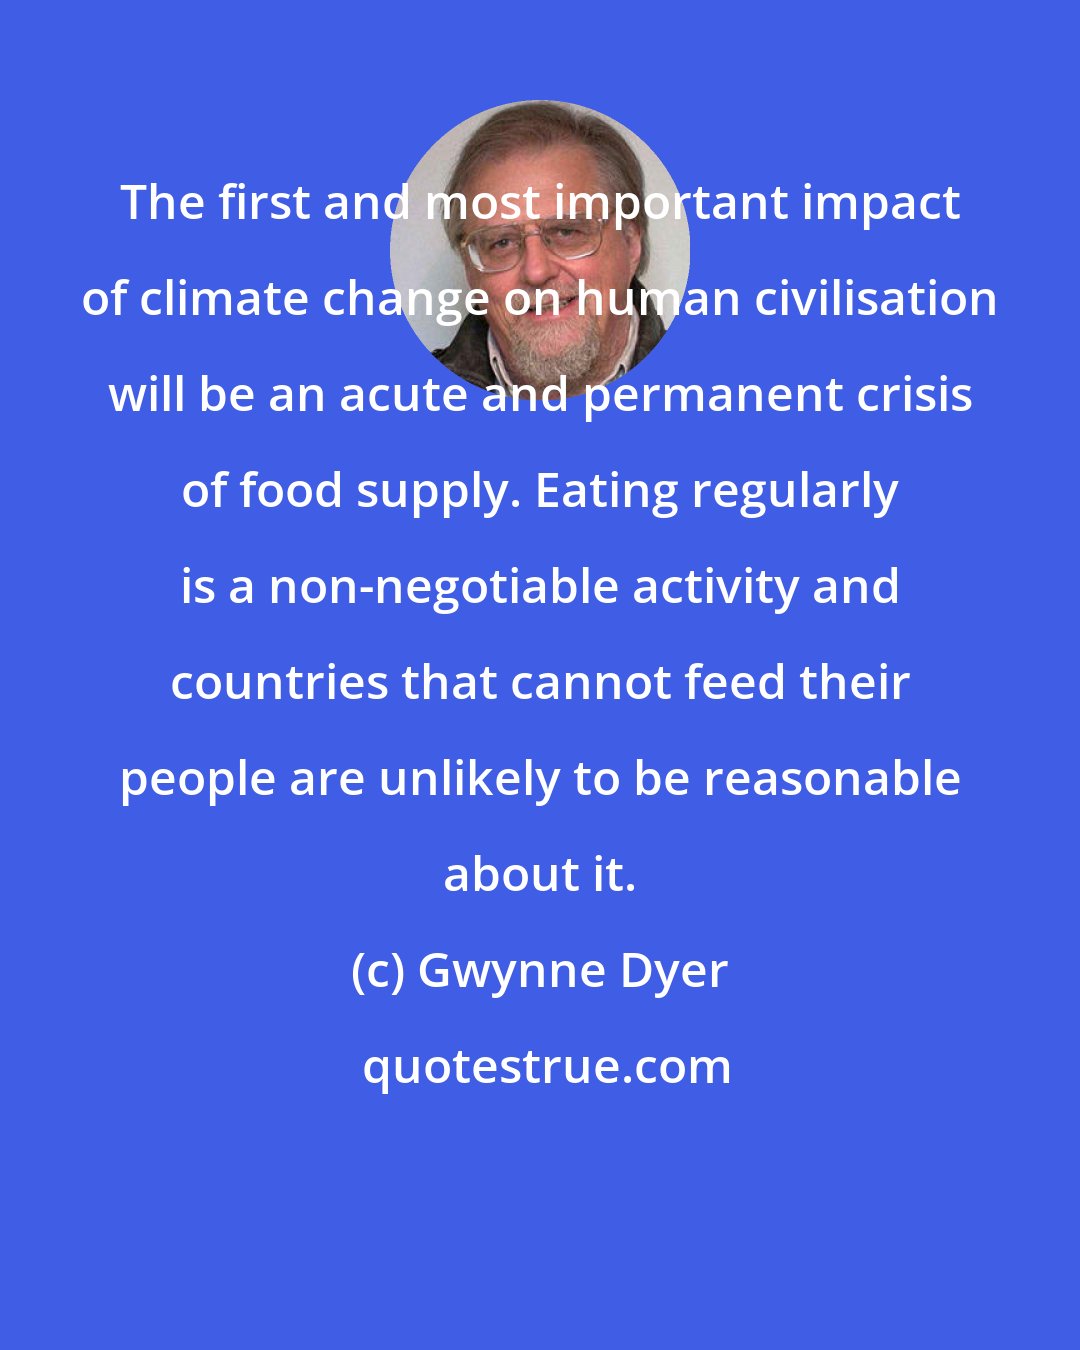 Gwynne Dyer: The first and most important impact of climate change on human civilisation will be an acute and permanent crisis of food supply. Eating regularly is a non-negotiable activity and countries that cannot feed their people are unlikely to be reasonable about it.